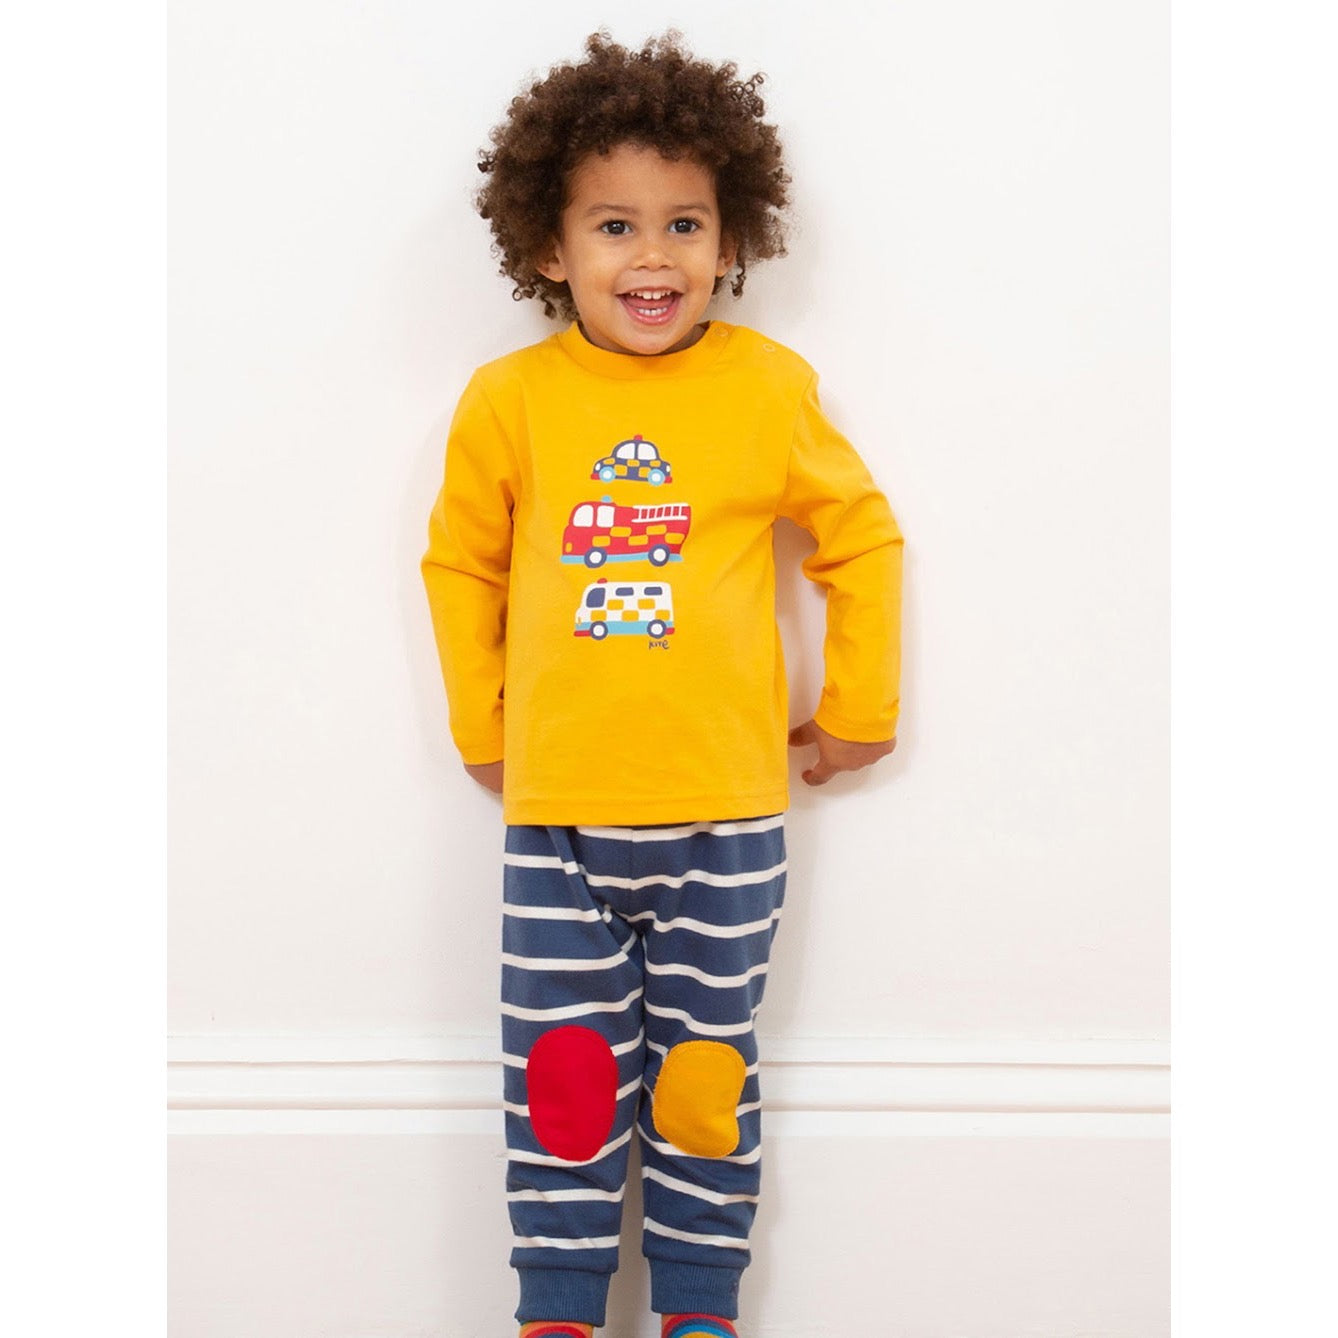 Kite Here To Help Infant T-Shirt 9398 Clothing 3-6M / Yellow,6-9M / Yellow,9-12M / Yellow,12-18M / Yellow,18-24M/2Y / Yellow,3YRS / Yellow,4YRS / Yellow